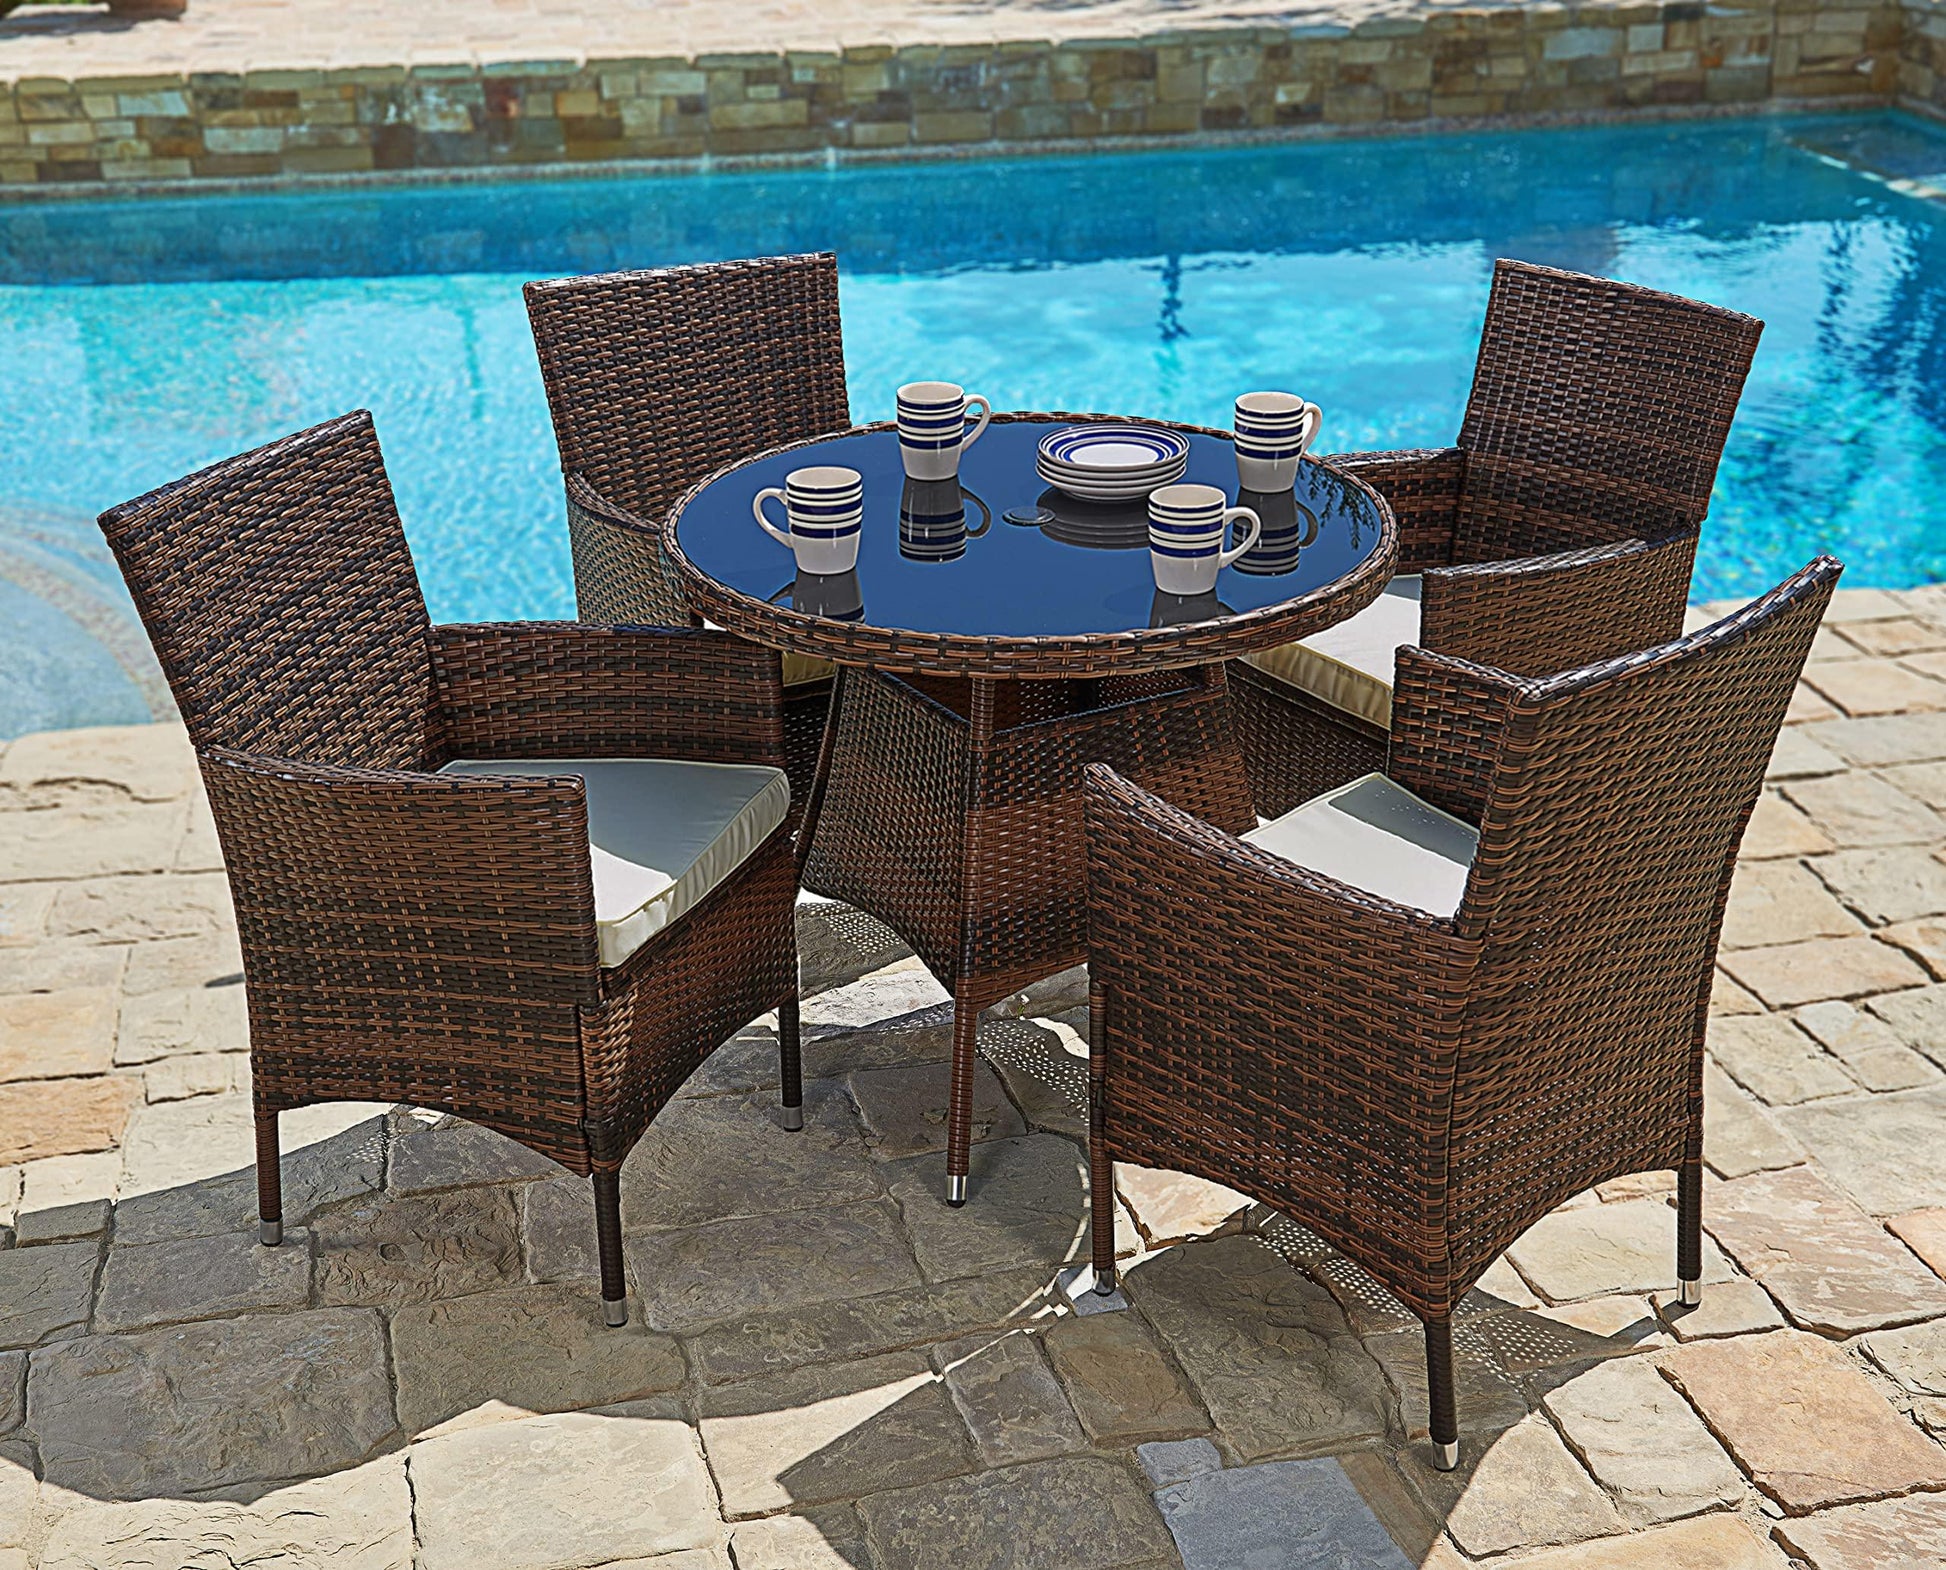 SUNCROWN 5 Piece Outdoor Dining Set All-Weather Wicker Patio Dining Table and Chairs with Cushions, Round Tempered Glass Tabletop with Umbrella Cutout for Patio Backyard Porch Garden Poolside - CookCave